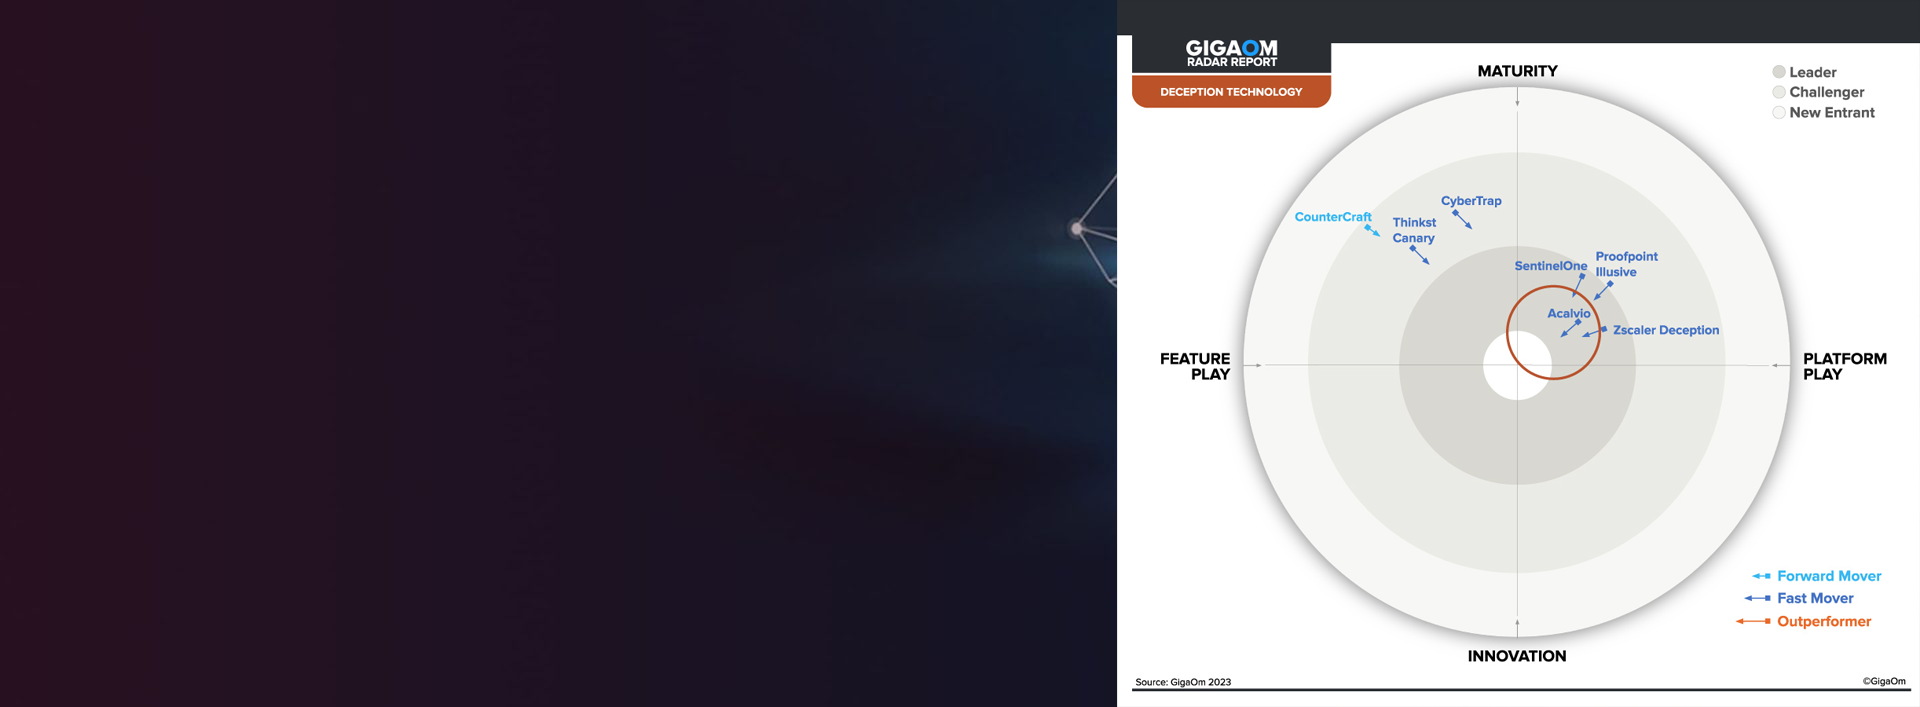 Acalvio named a leader in deception technology by the Gigaom report